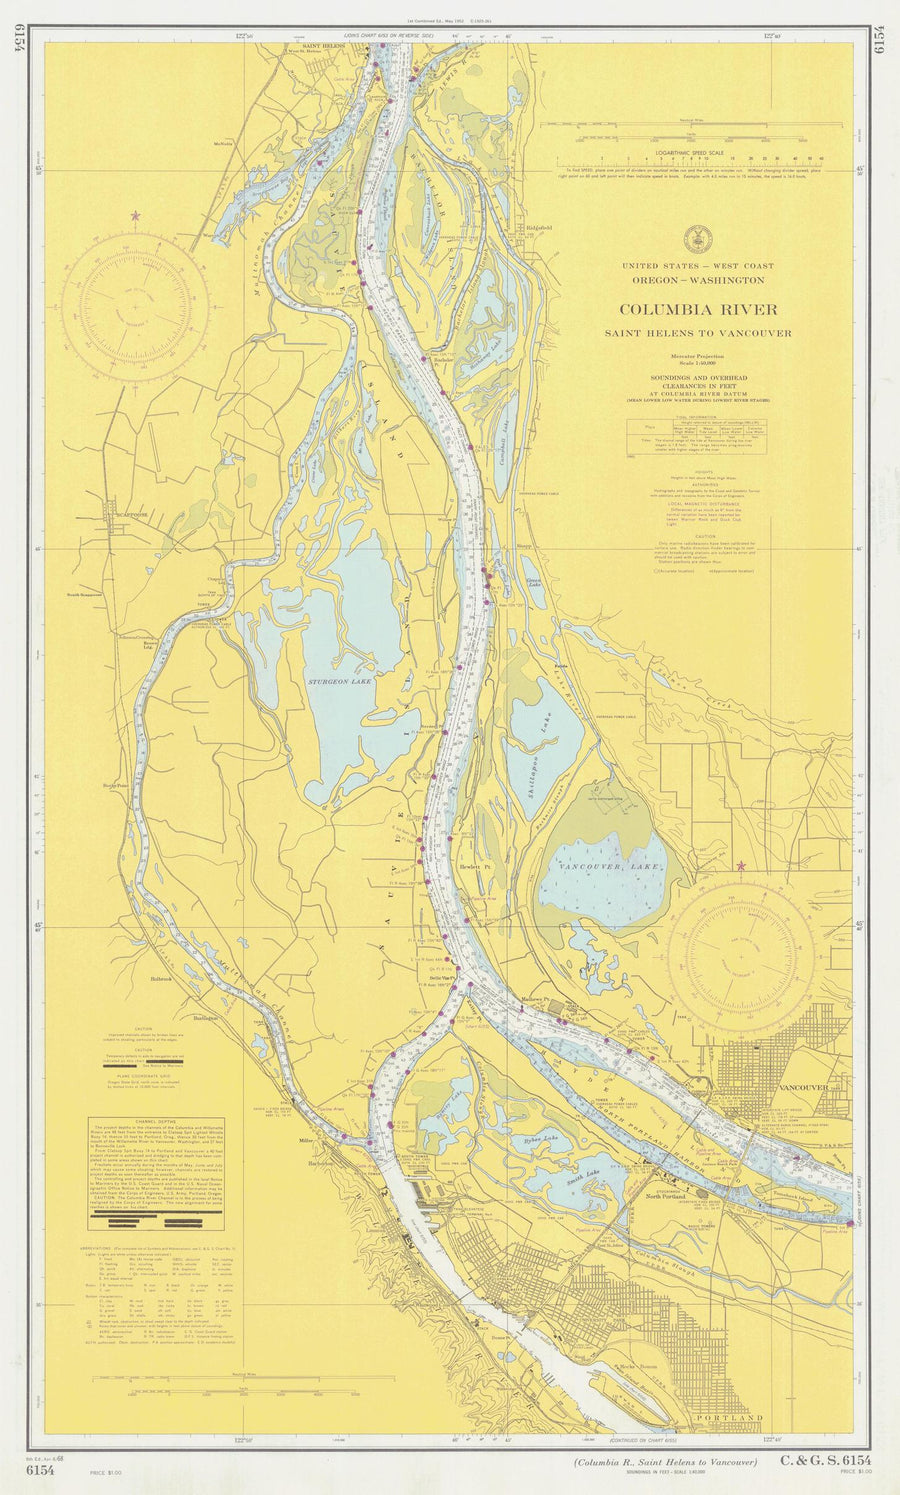 Columbia River Map - St. Helens to Vancouver 1968